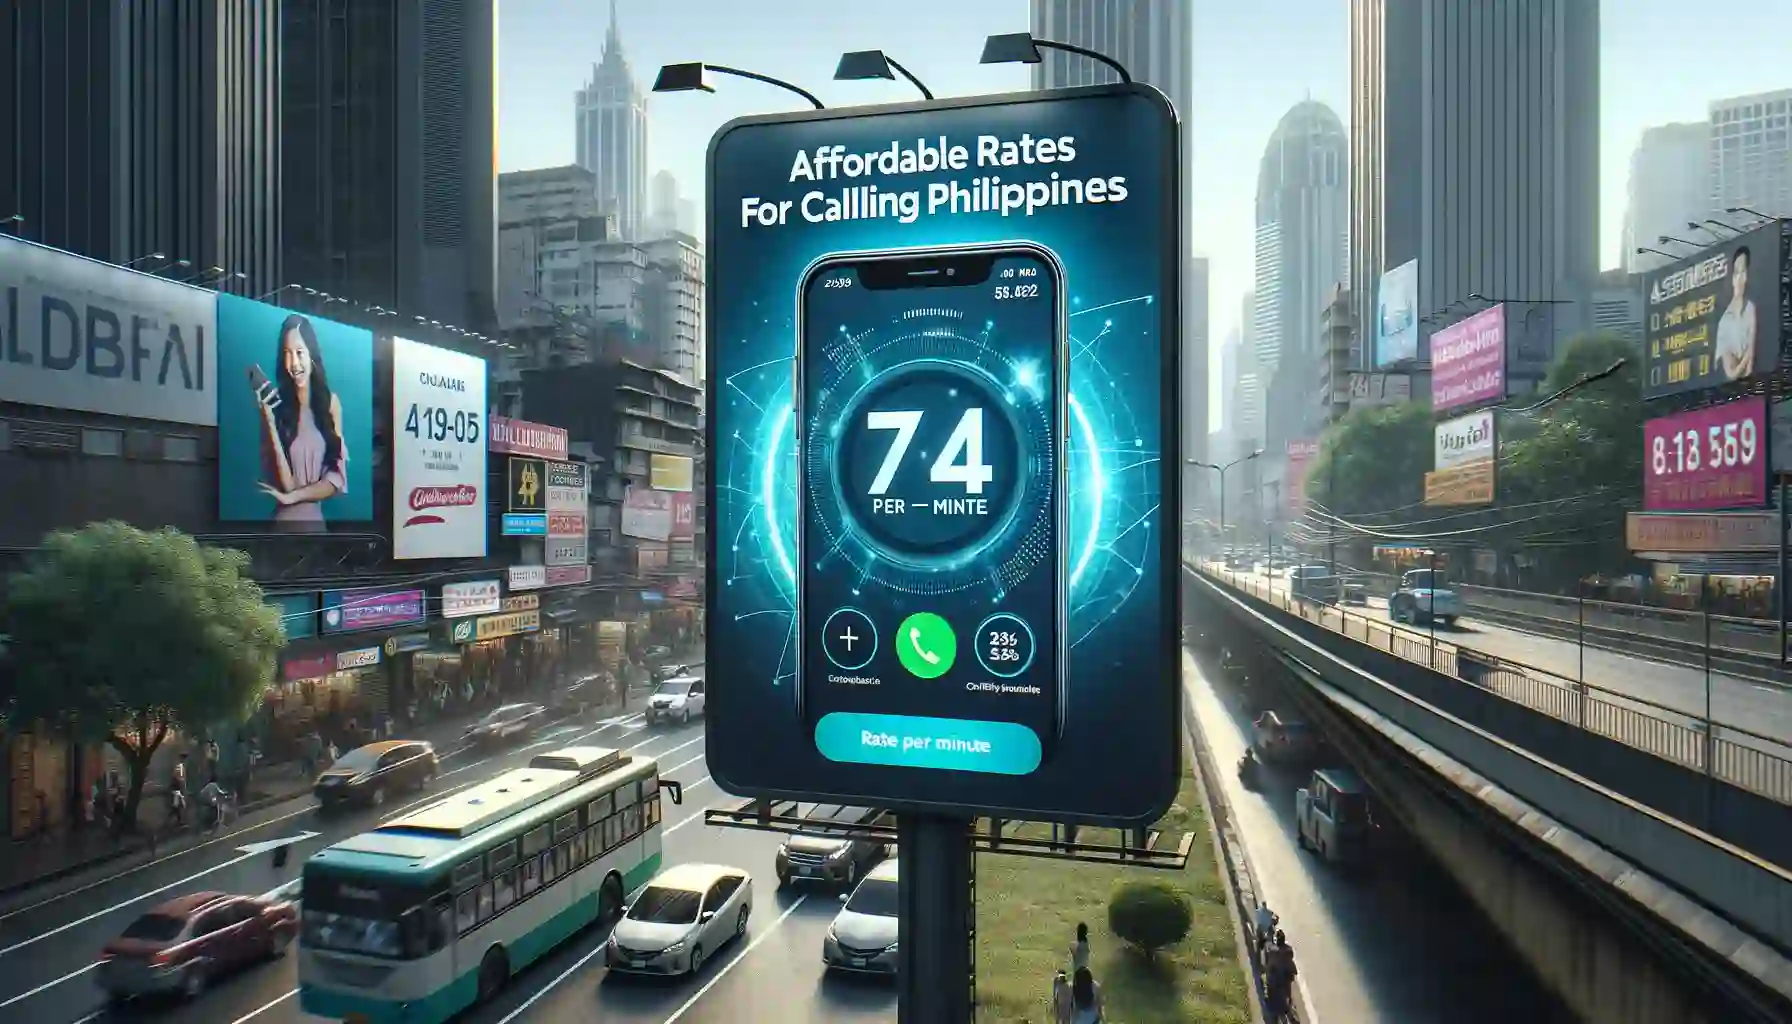 Affordable rates for calling Philippines